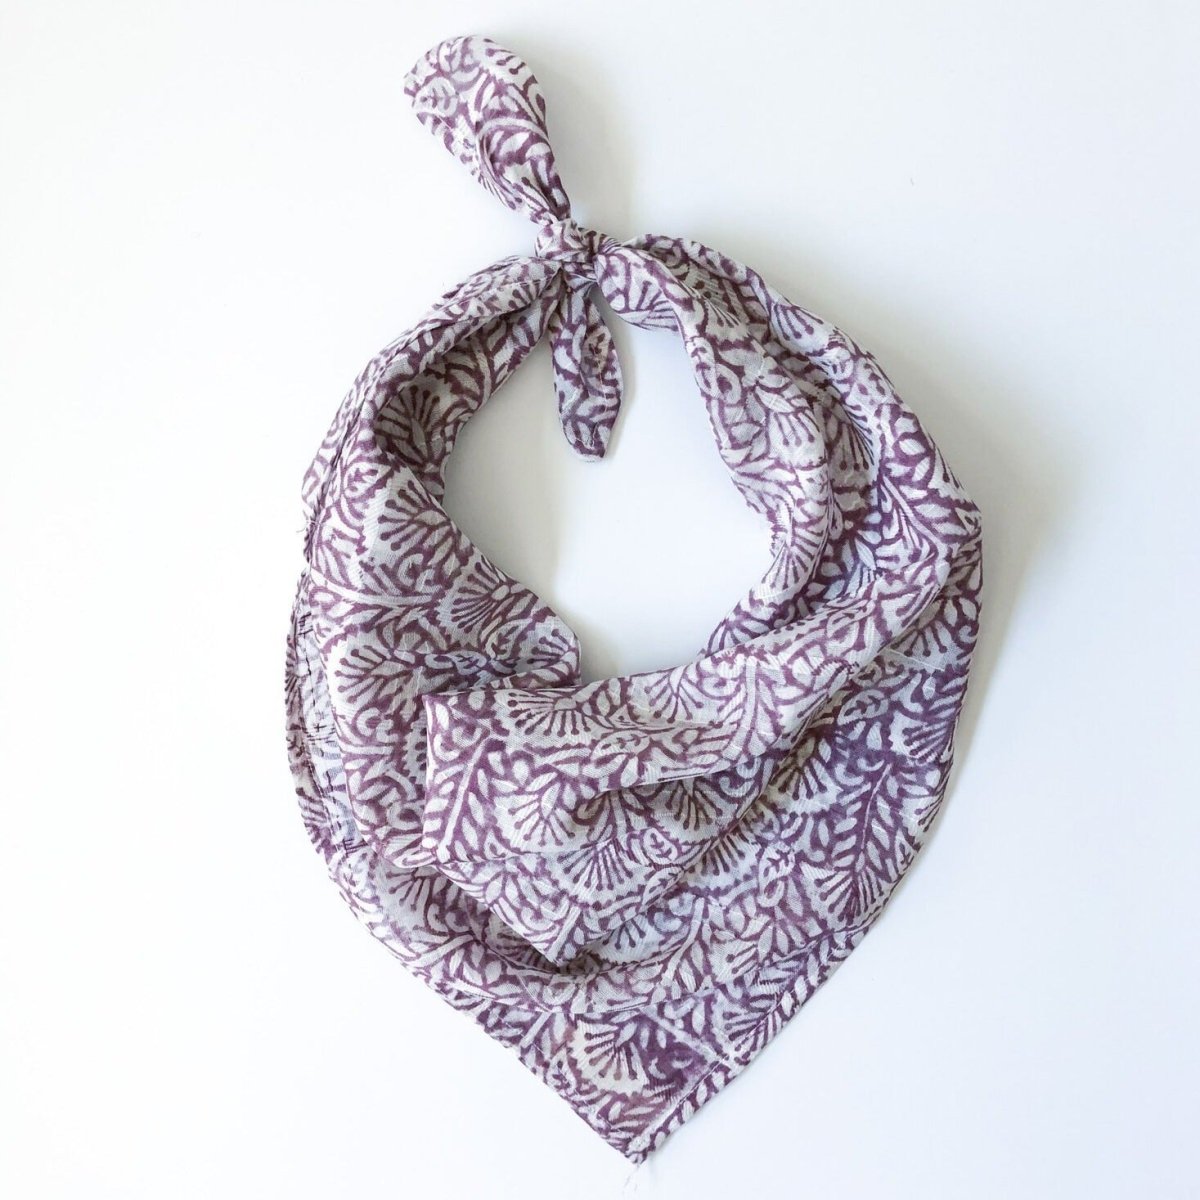 A purple and white patterned bandana, folded over and tied in a knot. Block printed by hand, the Lavender Bandana from Maelu is designed in Portland, Oregon and handmade in India.